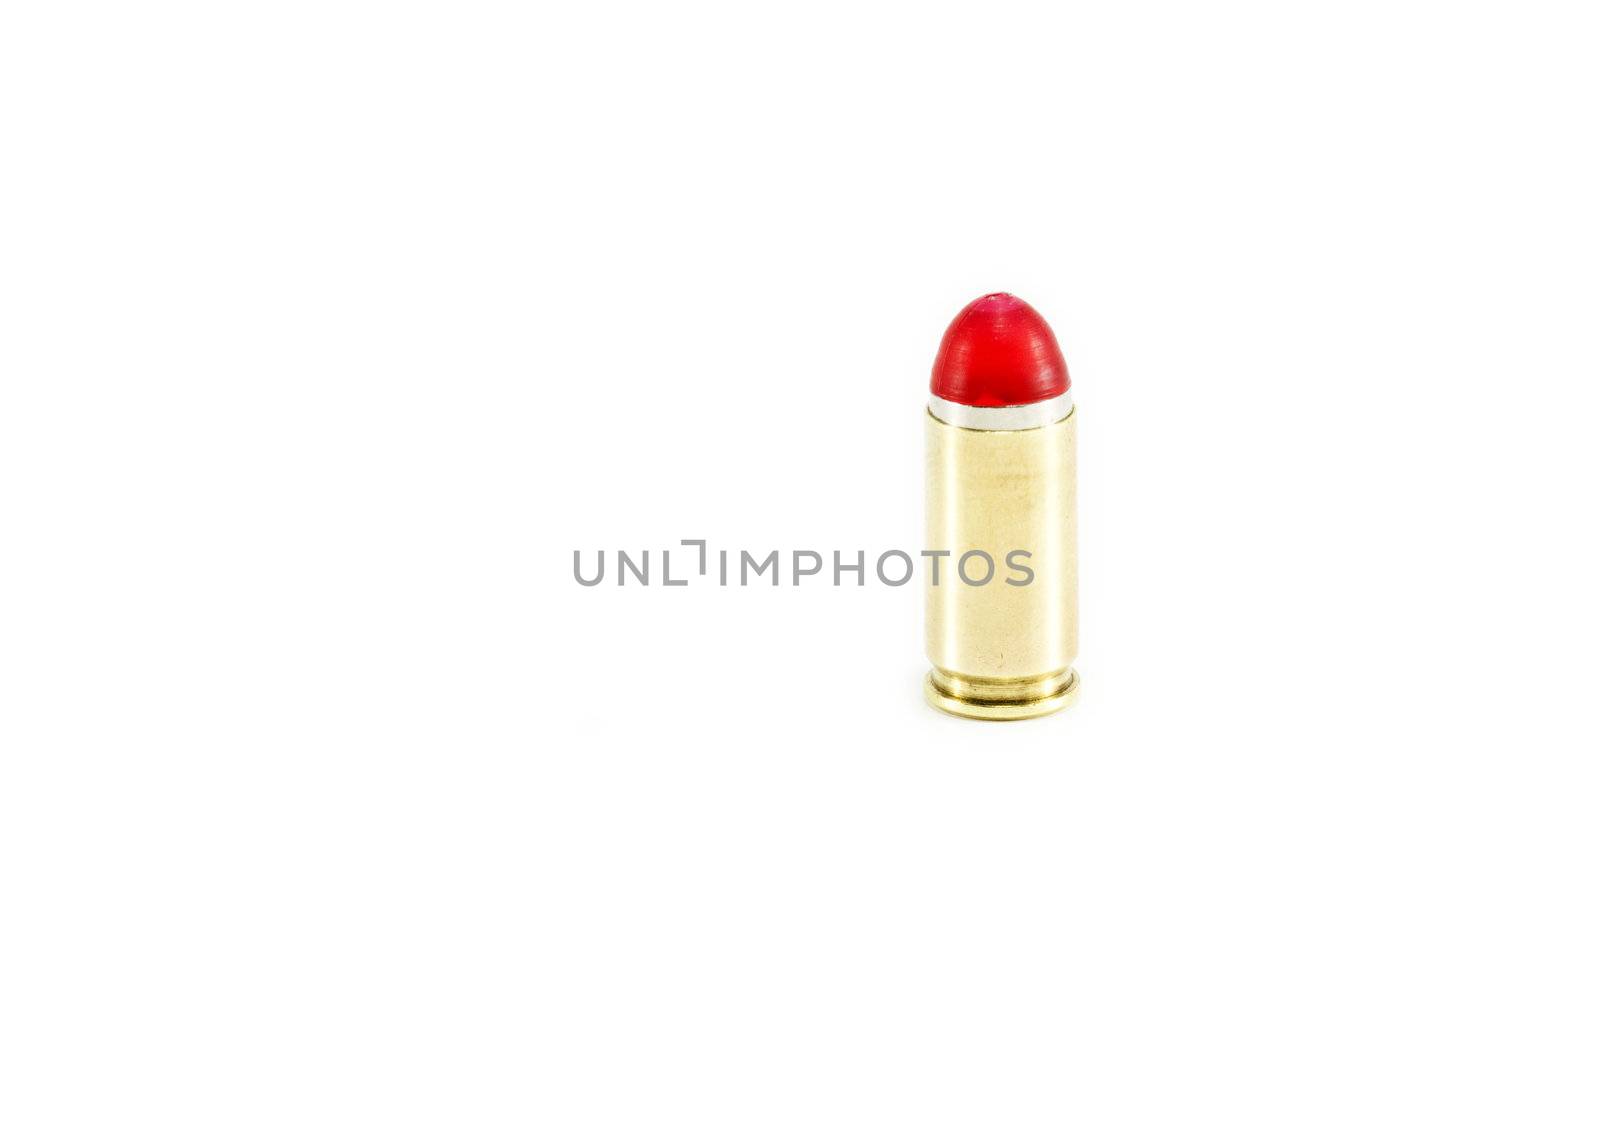 A single 9mm shock round / bullet by ChrisAlleaume